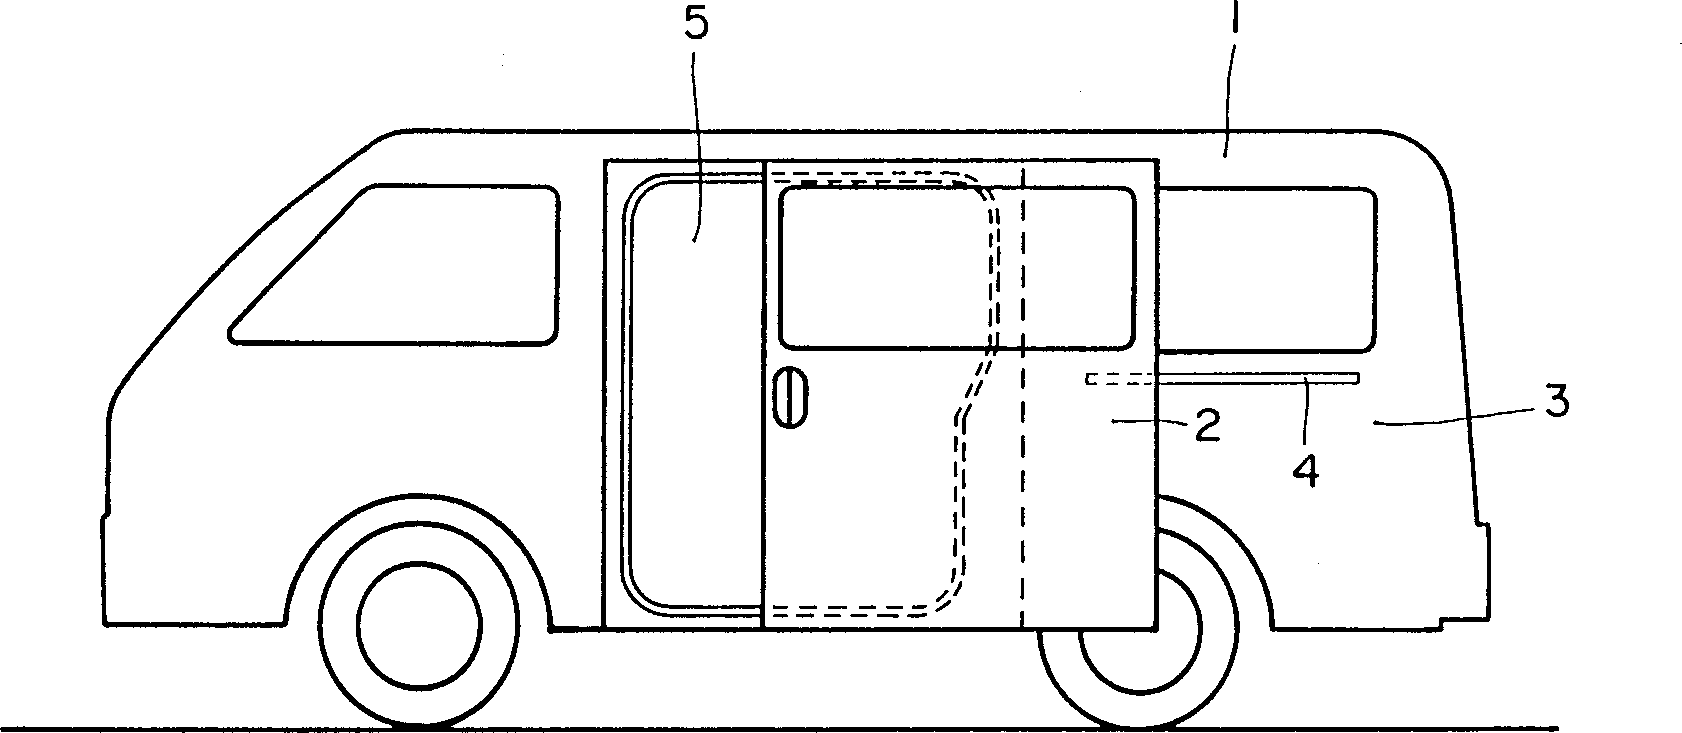 Device for holding vehicle sliding door at full-open position